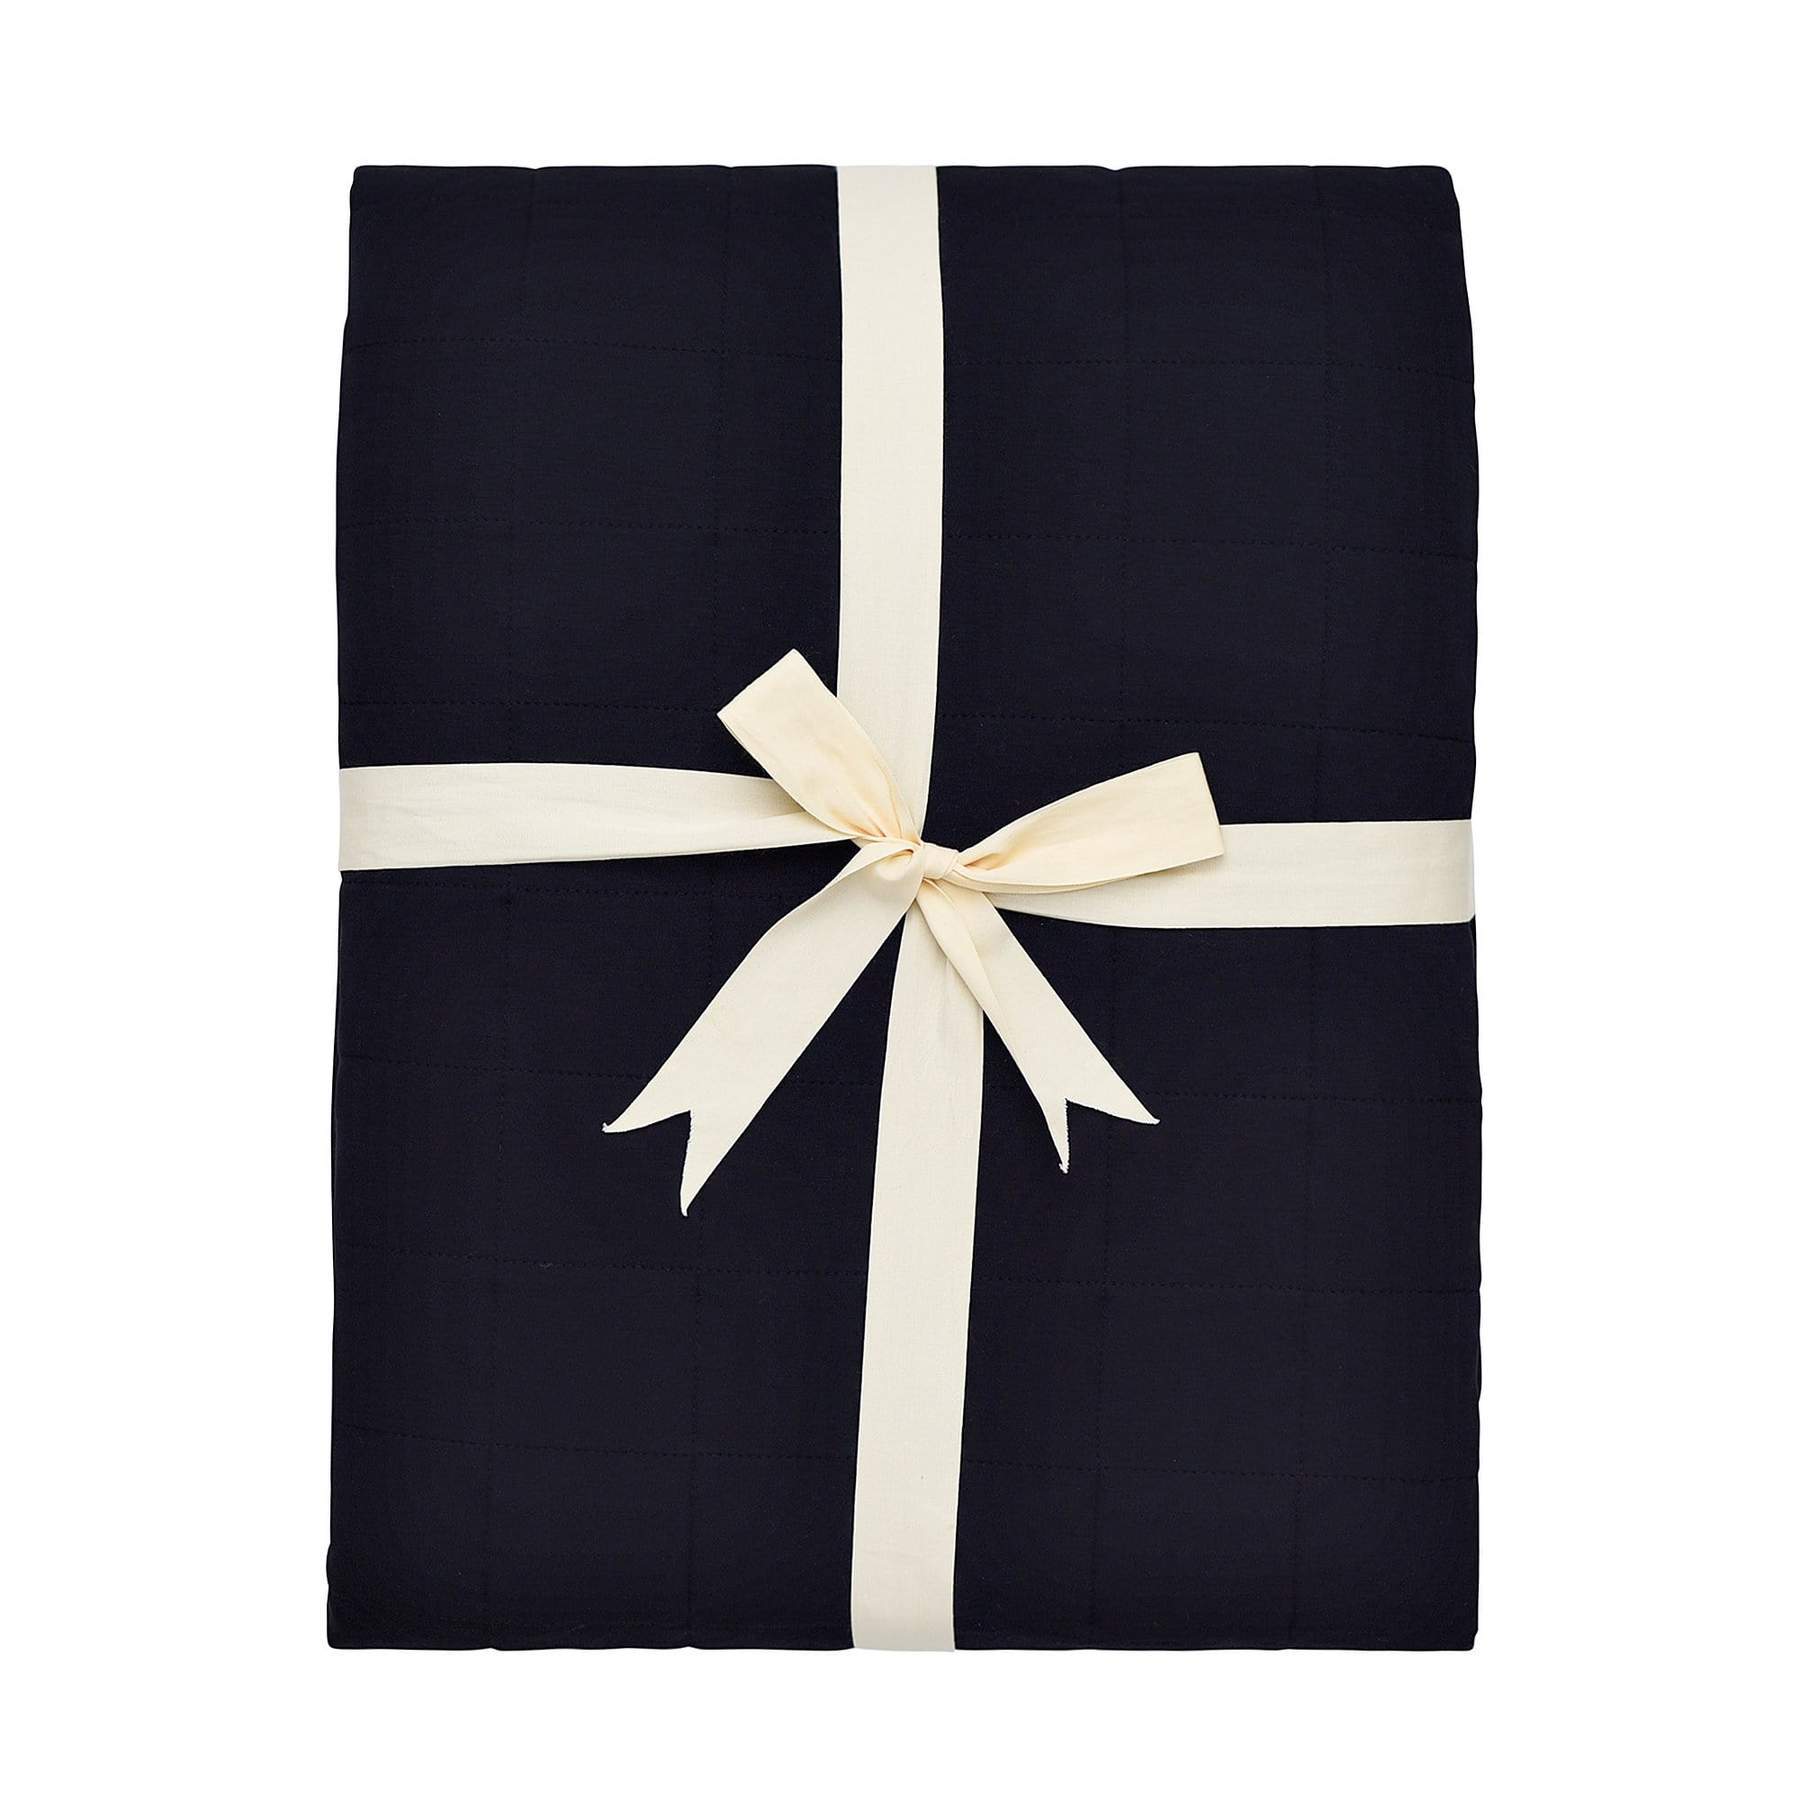 Kyte BABY Adult Blanket 1.0 Midnight / Adult Adult Quilted Blanket in Midnight 1.0